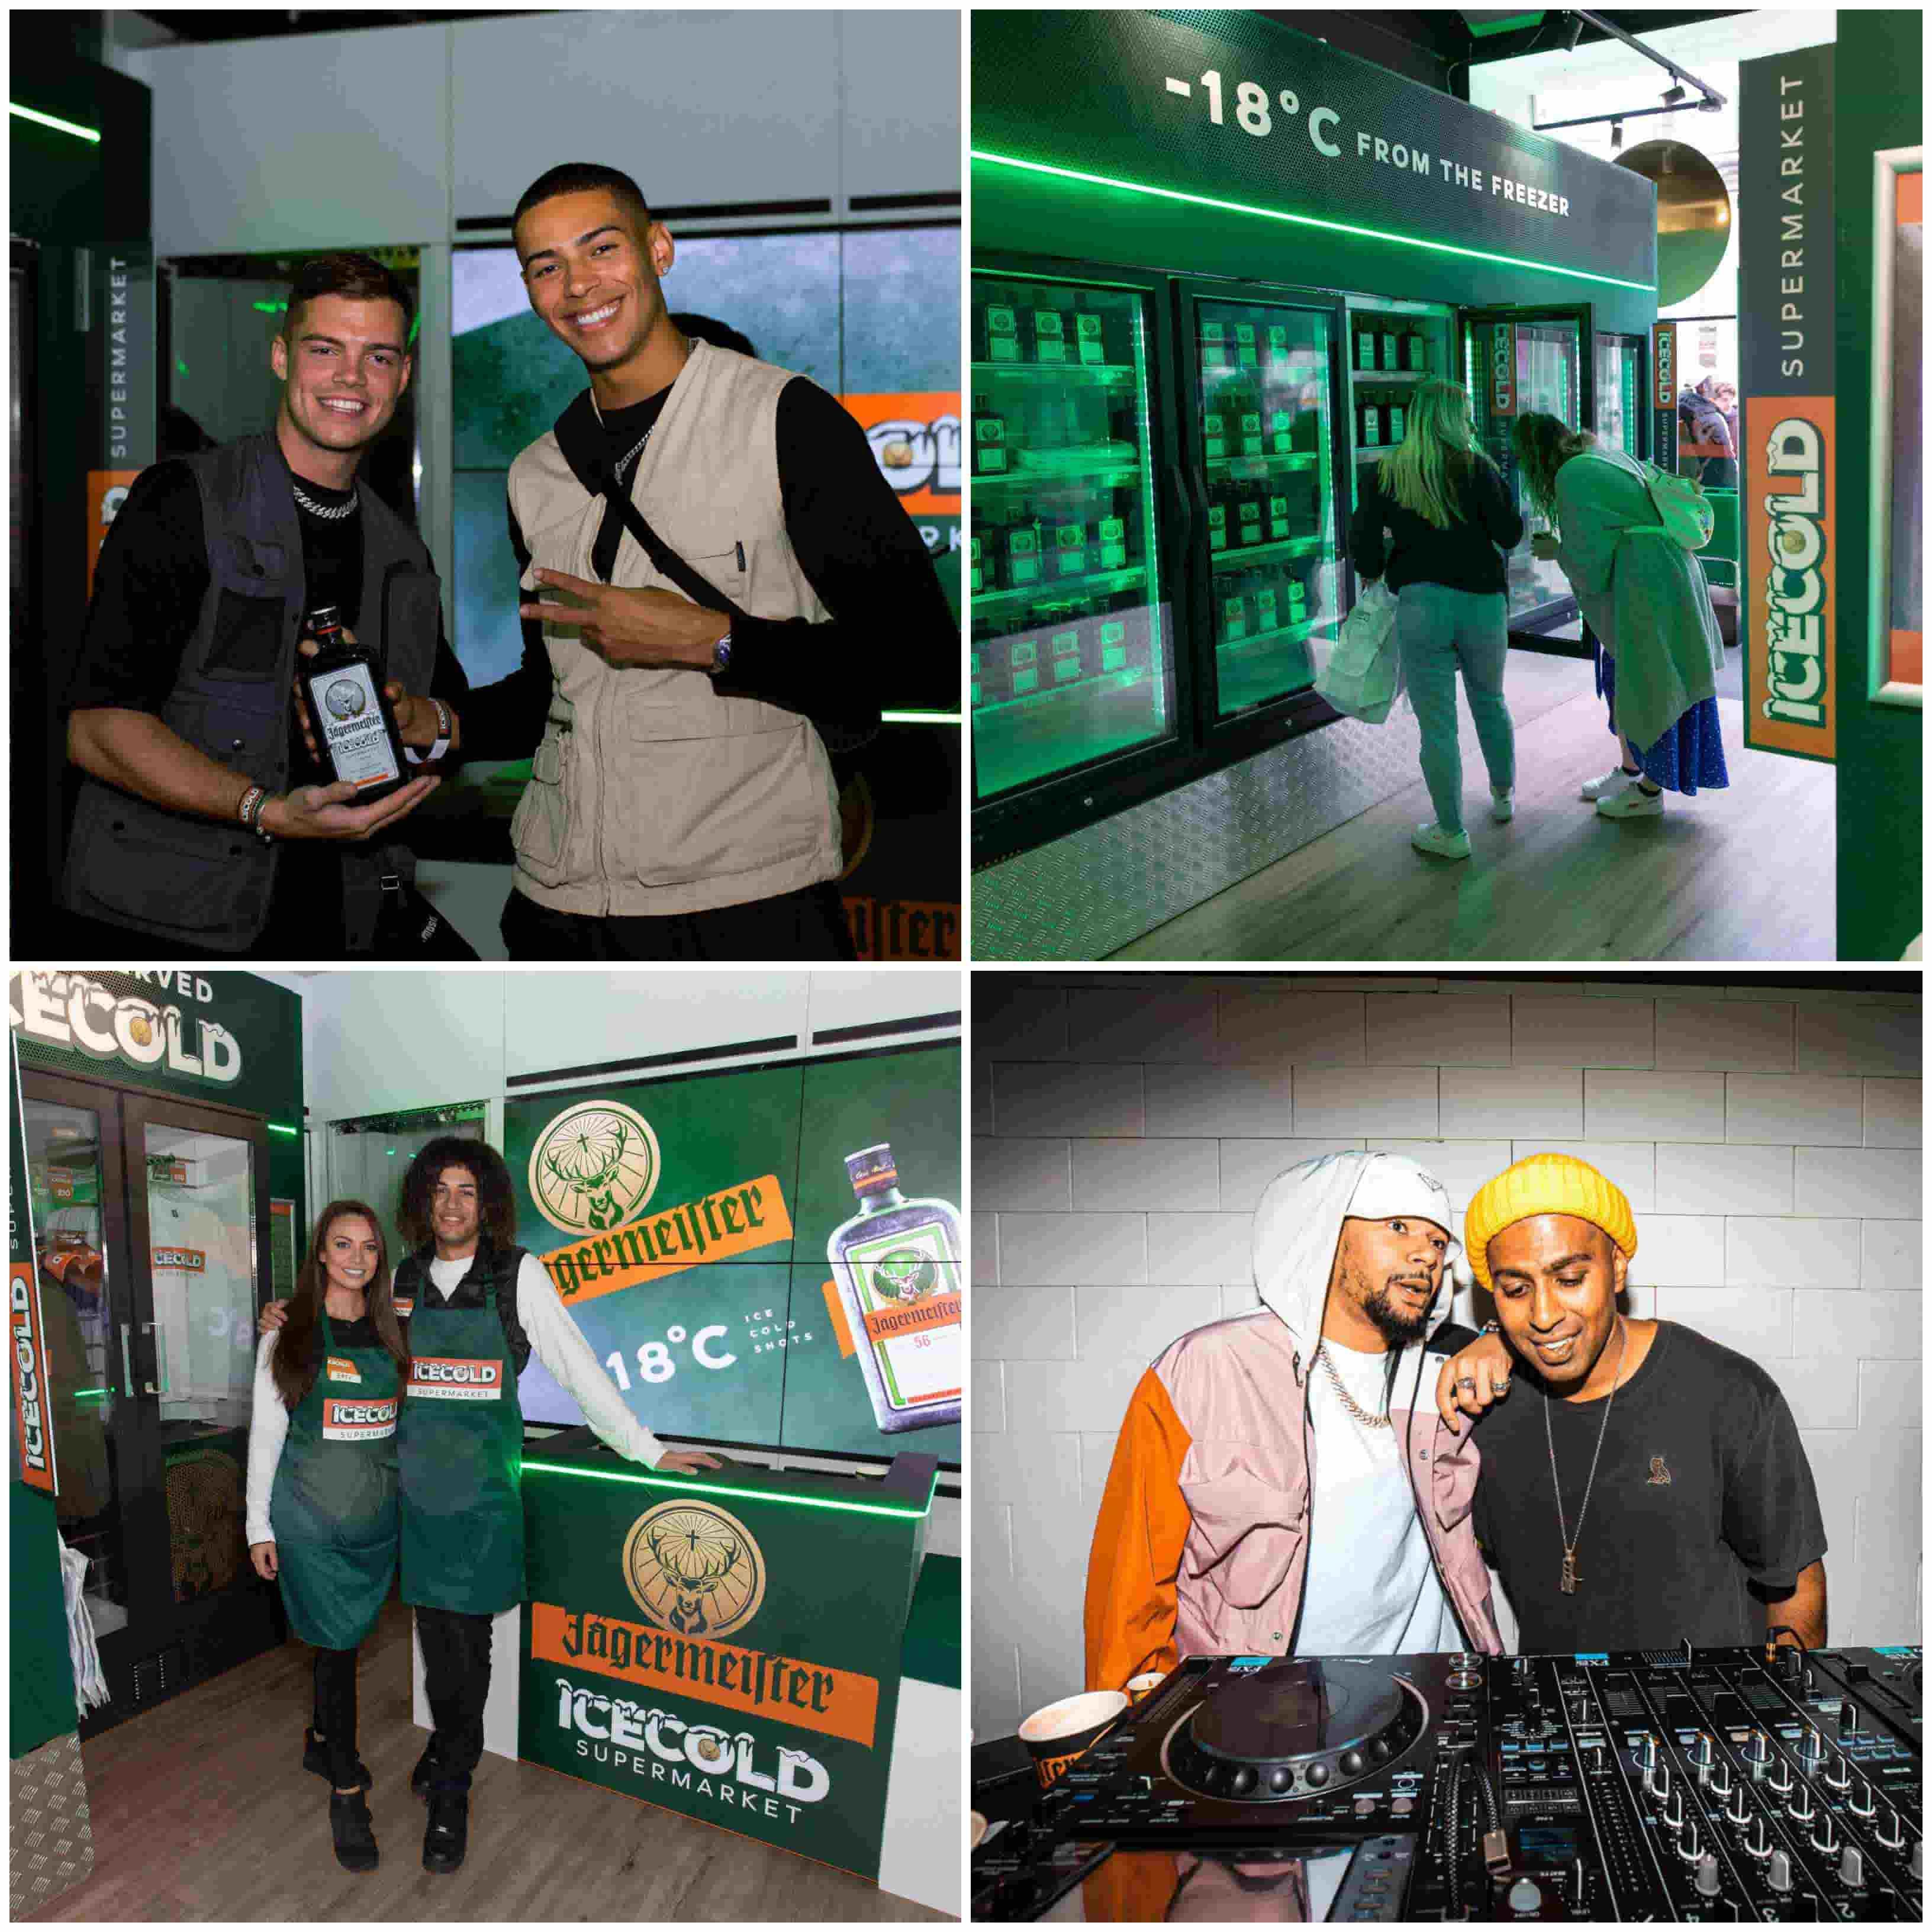 Collage of four shots from Jagermeister pop up at Sook Oxford Street including DJ set, jagermeister products in fridges